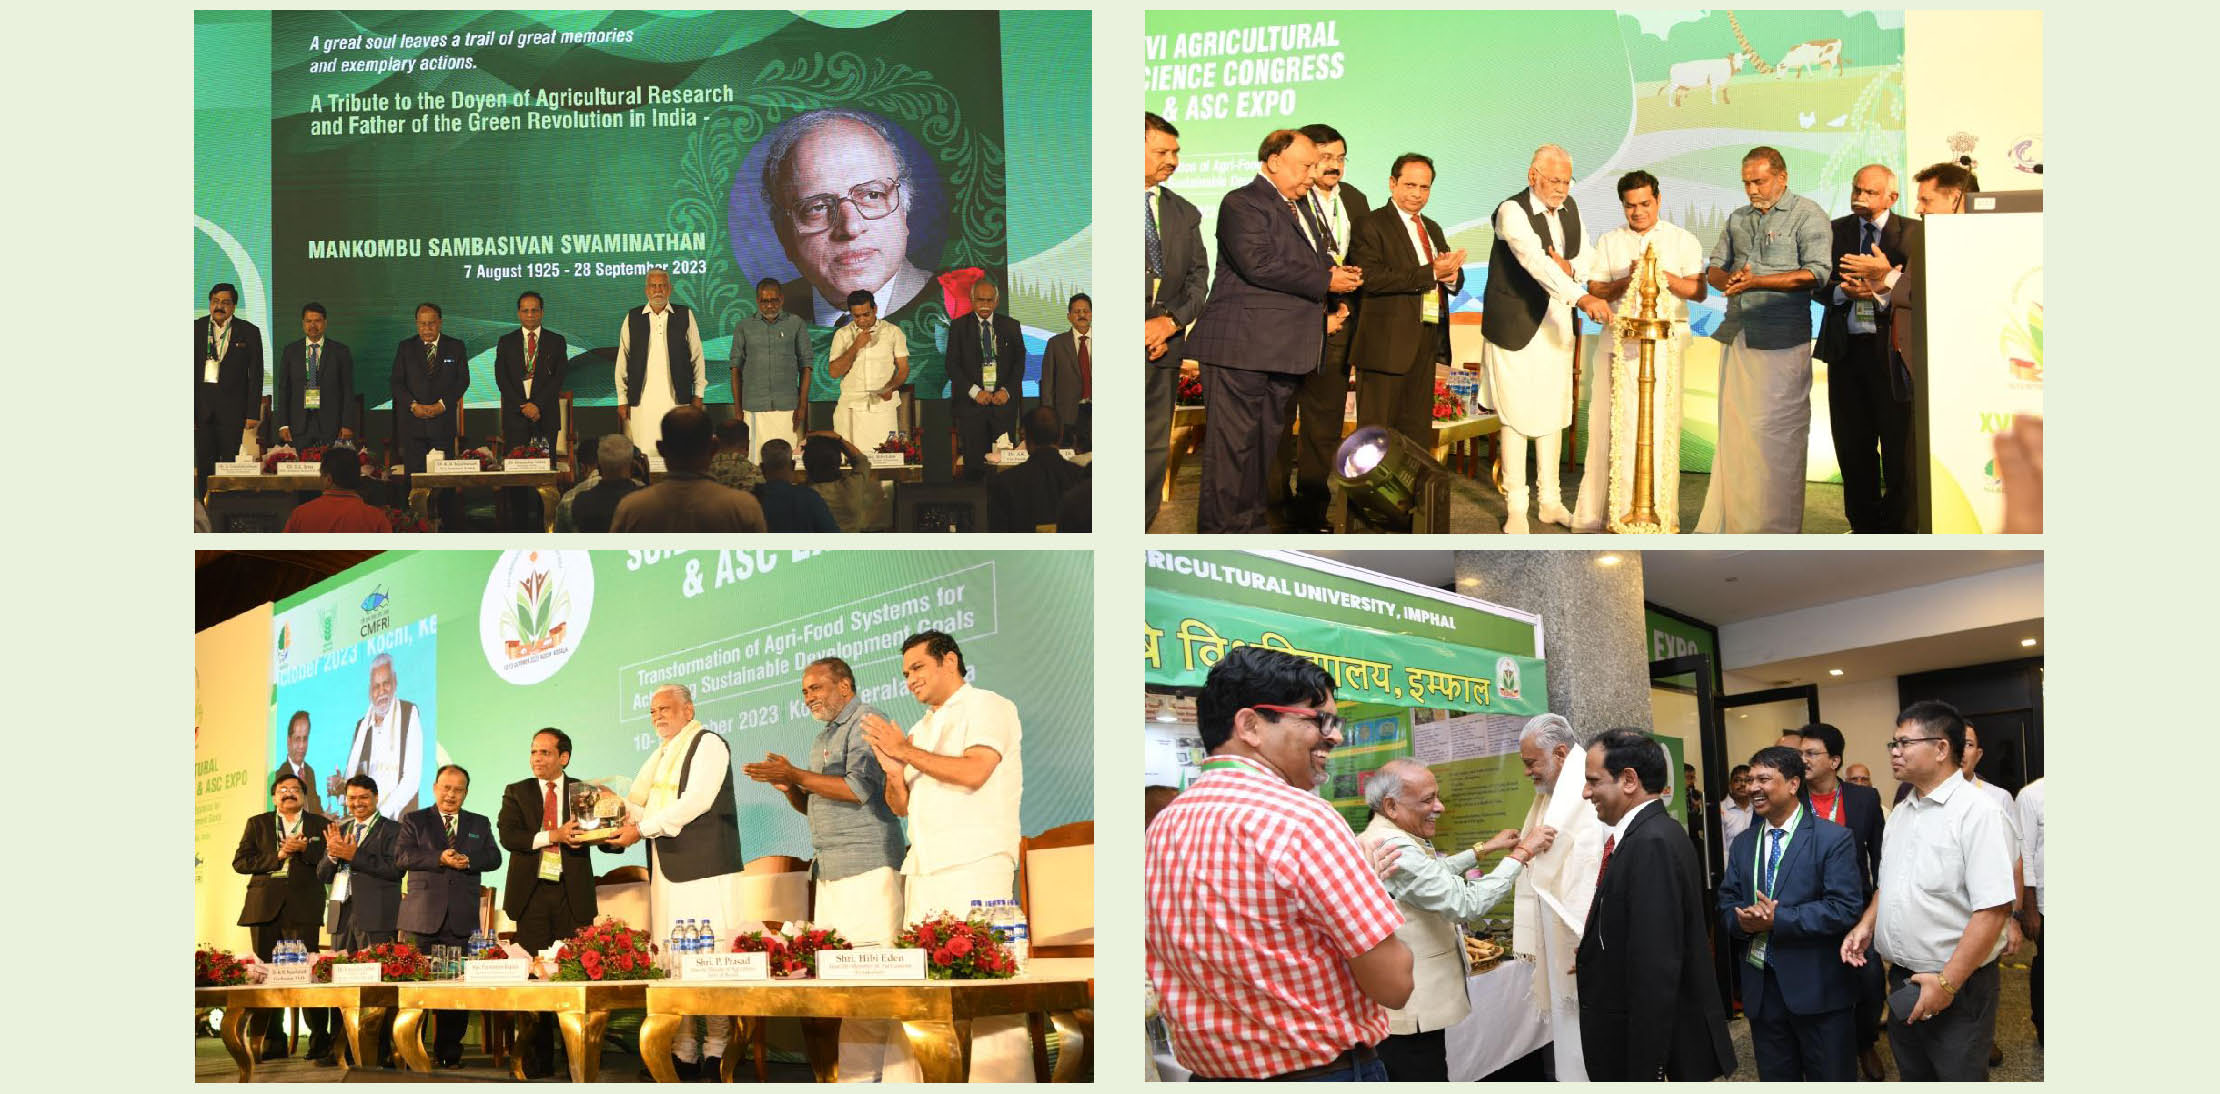 Inauguration of XVI Agricultural Science Congress